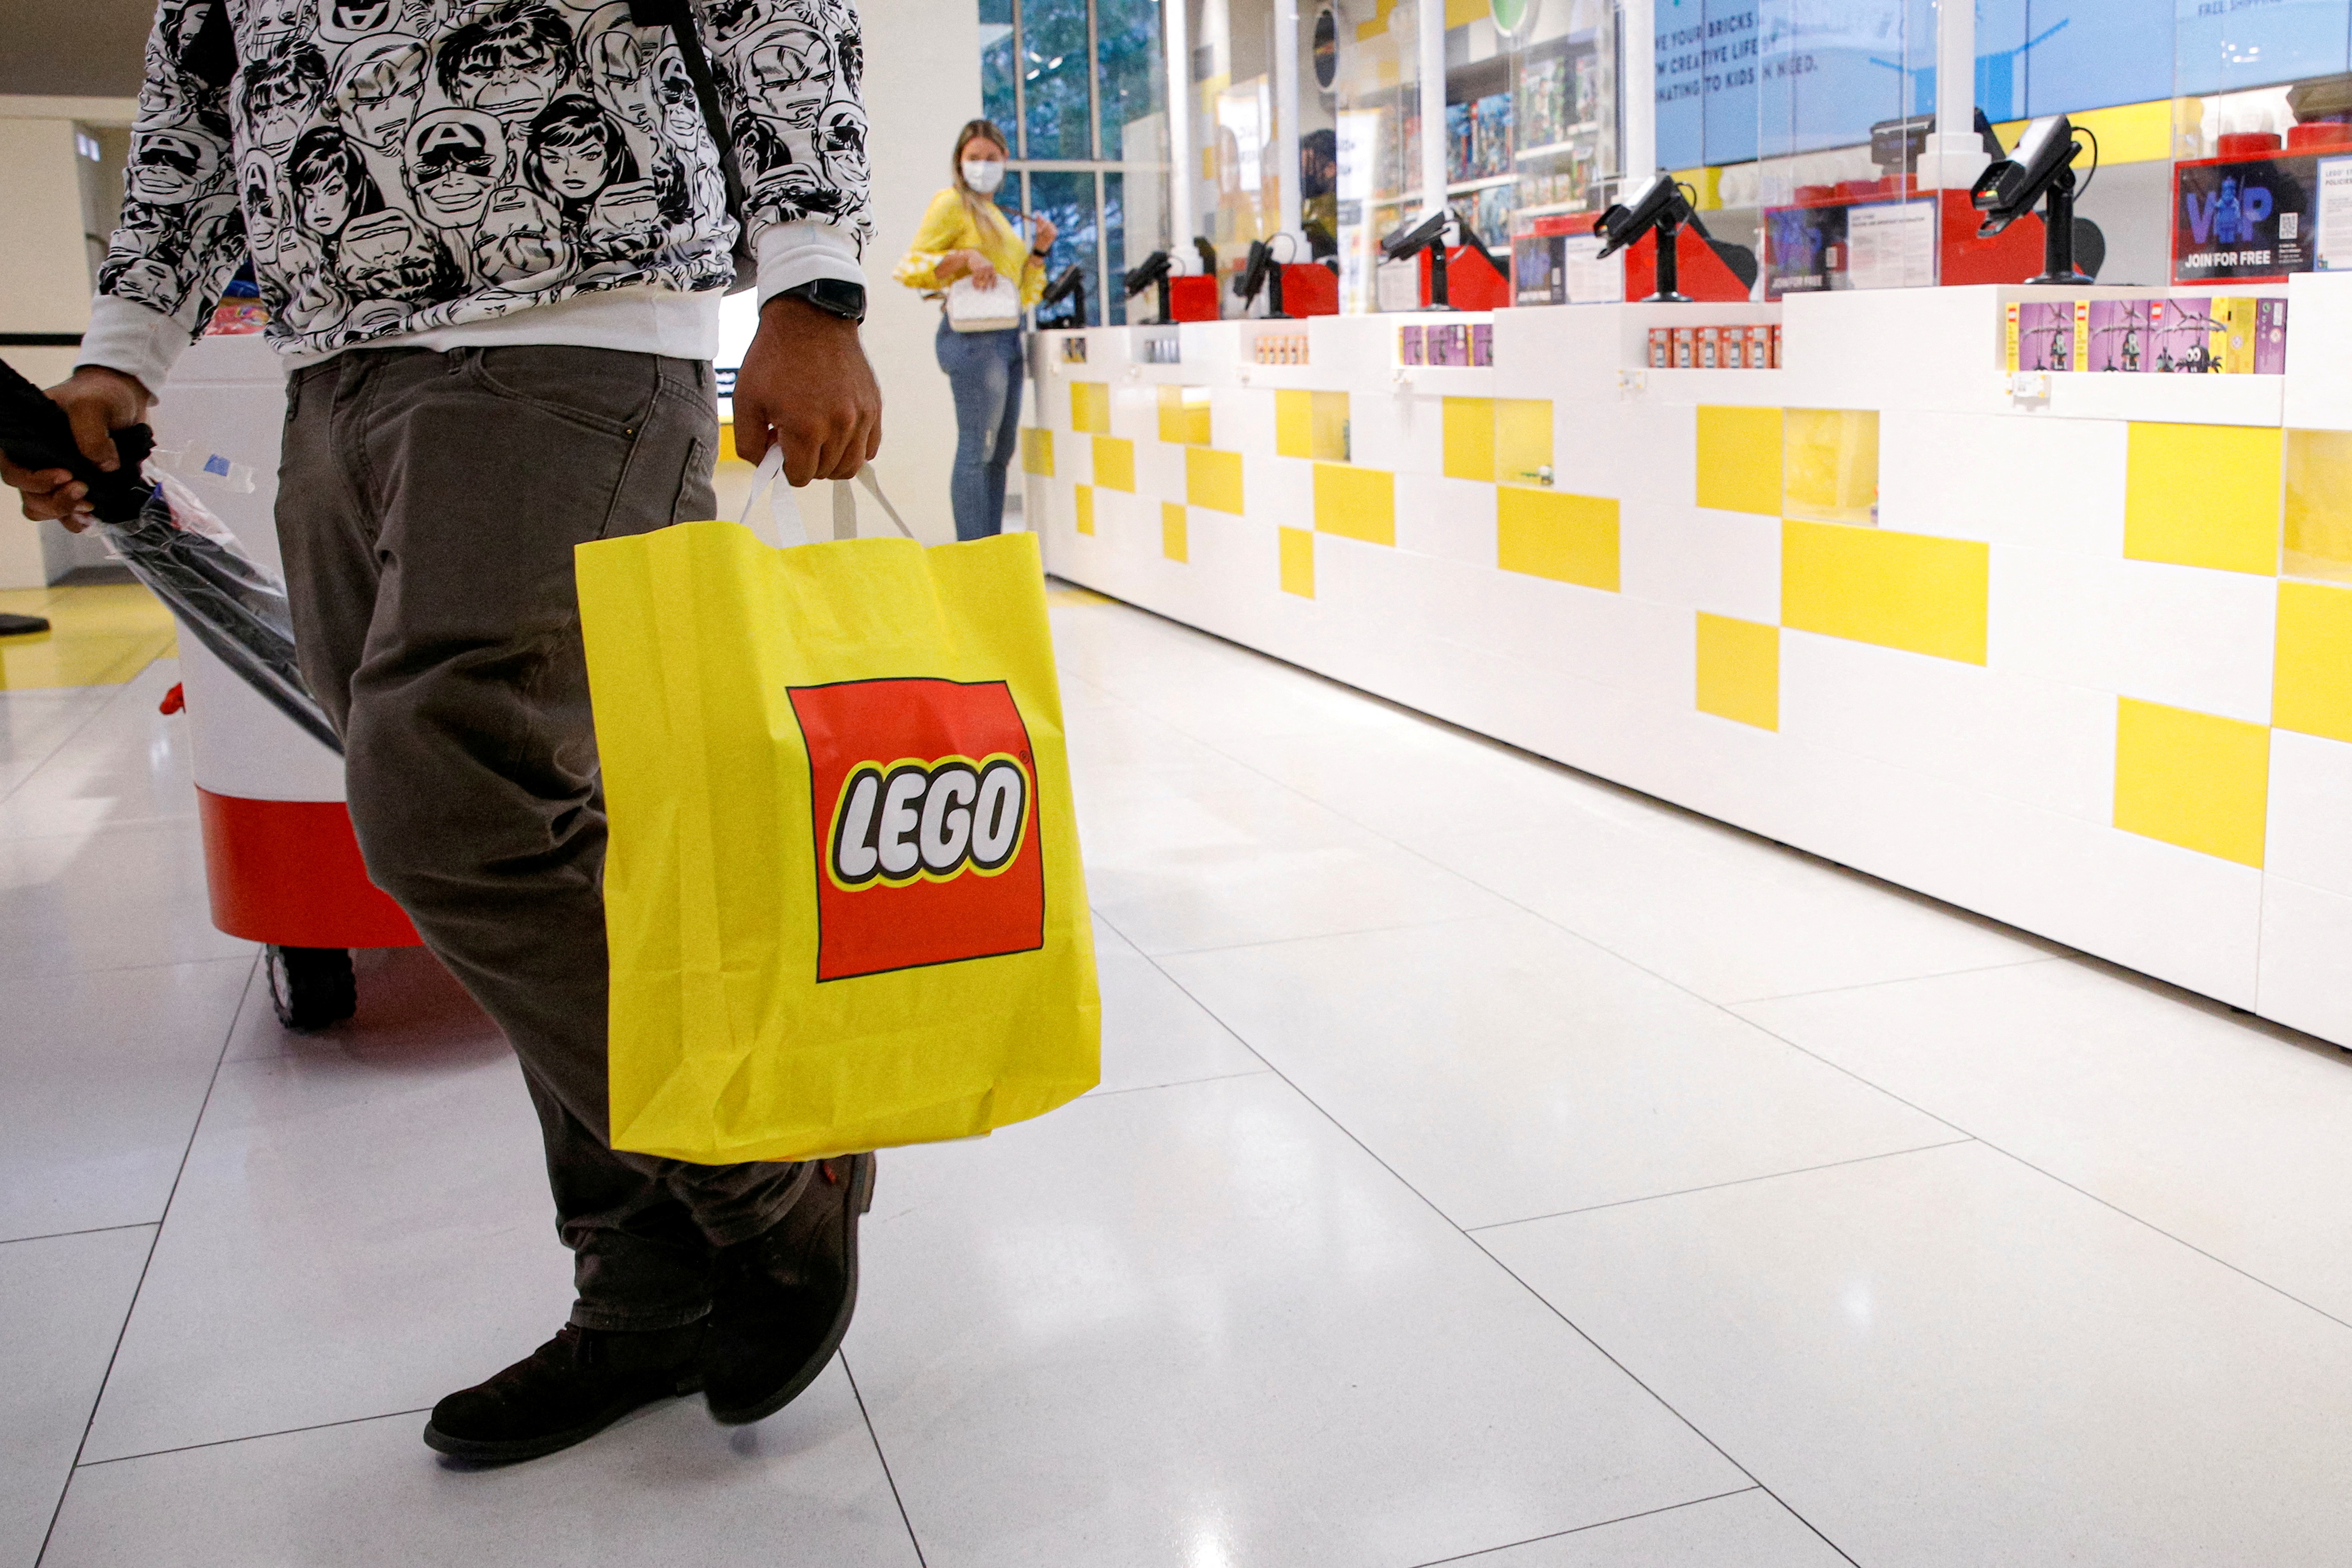 A customer carries a bag while shopping in the 5th Avenue Lego store in New York